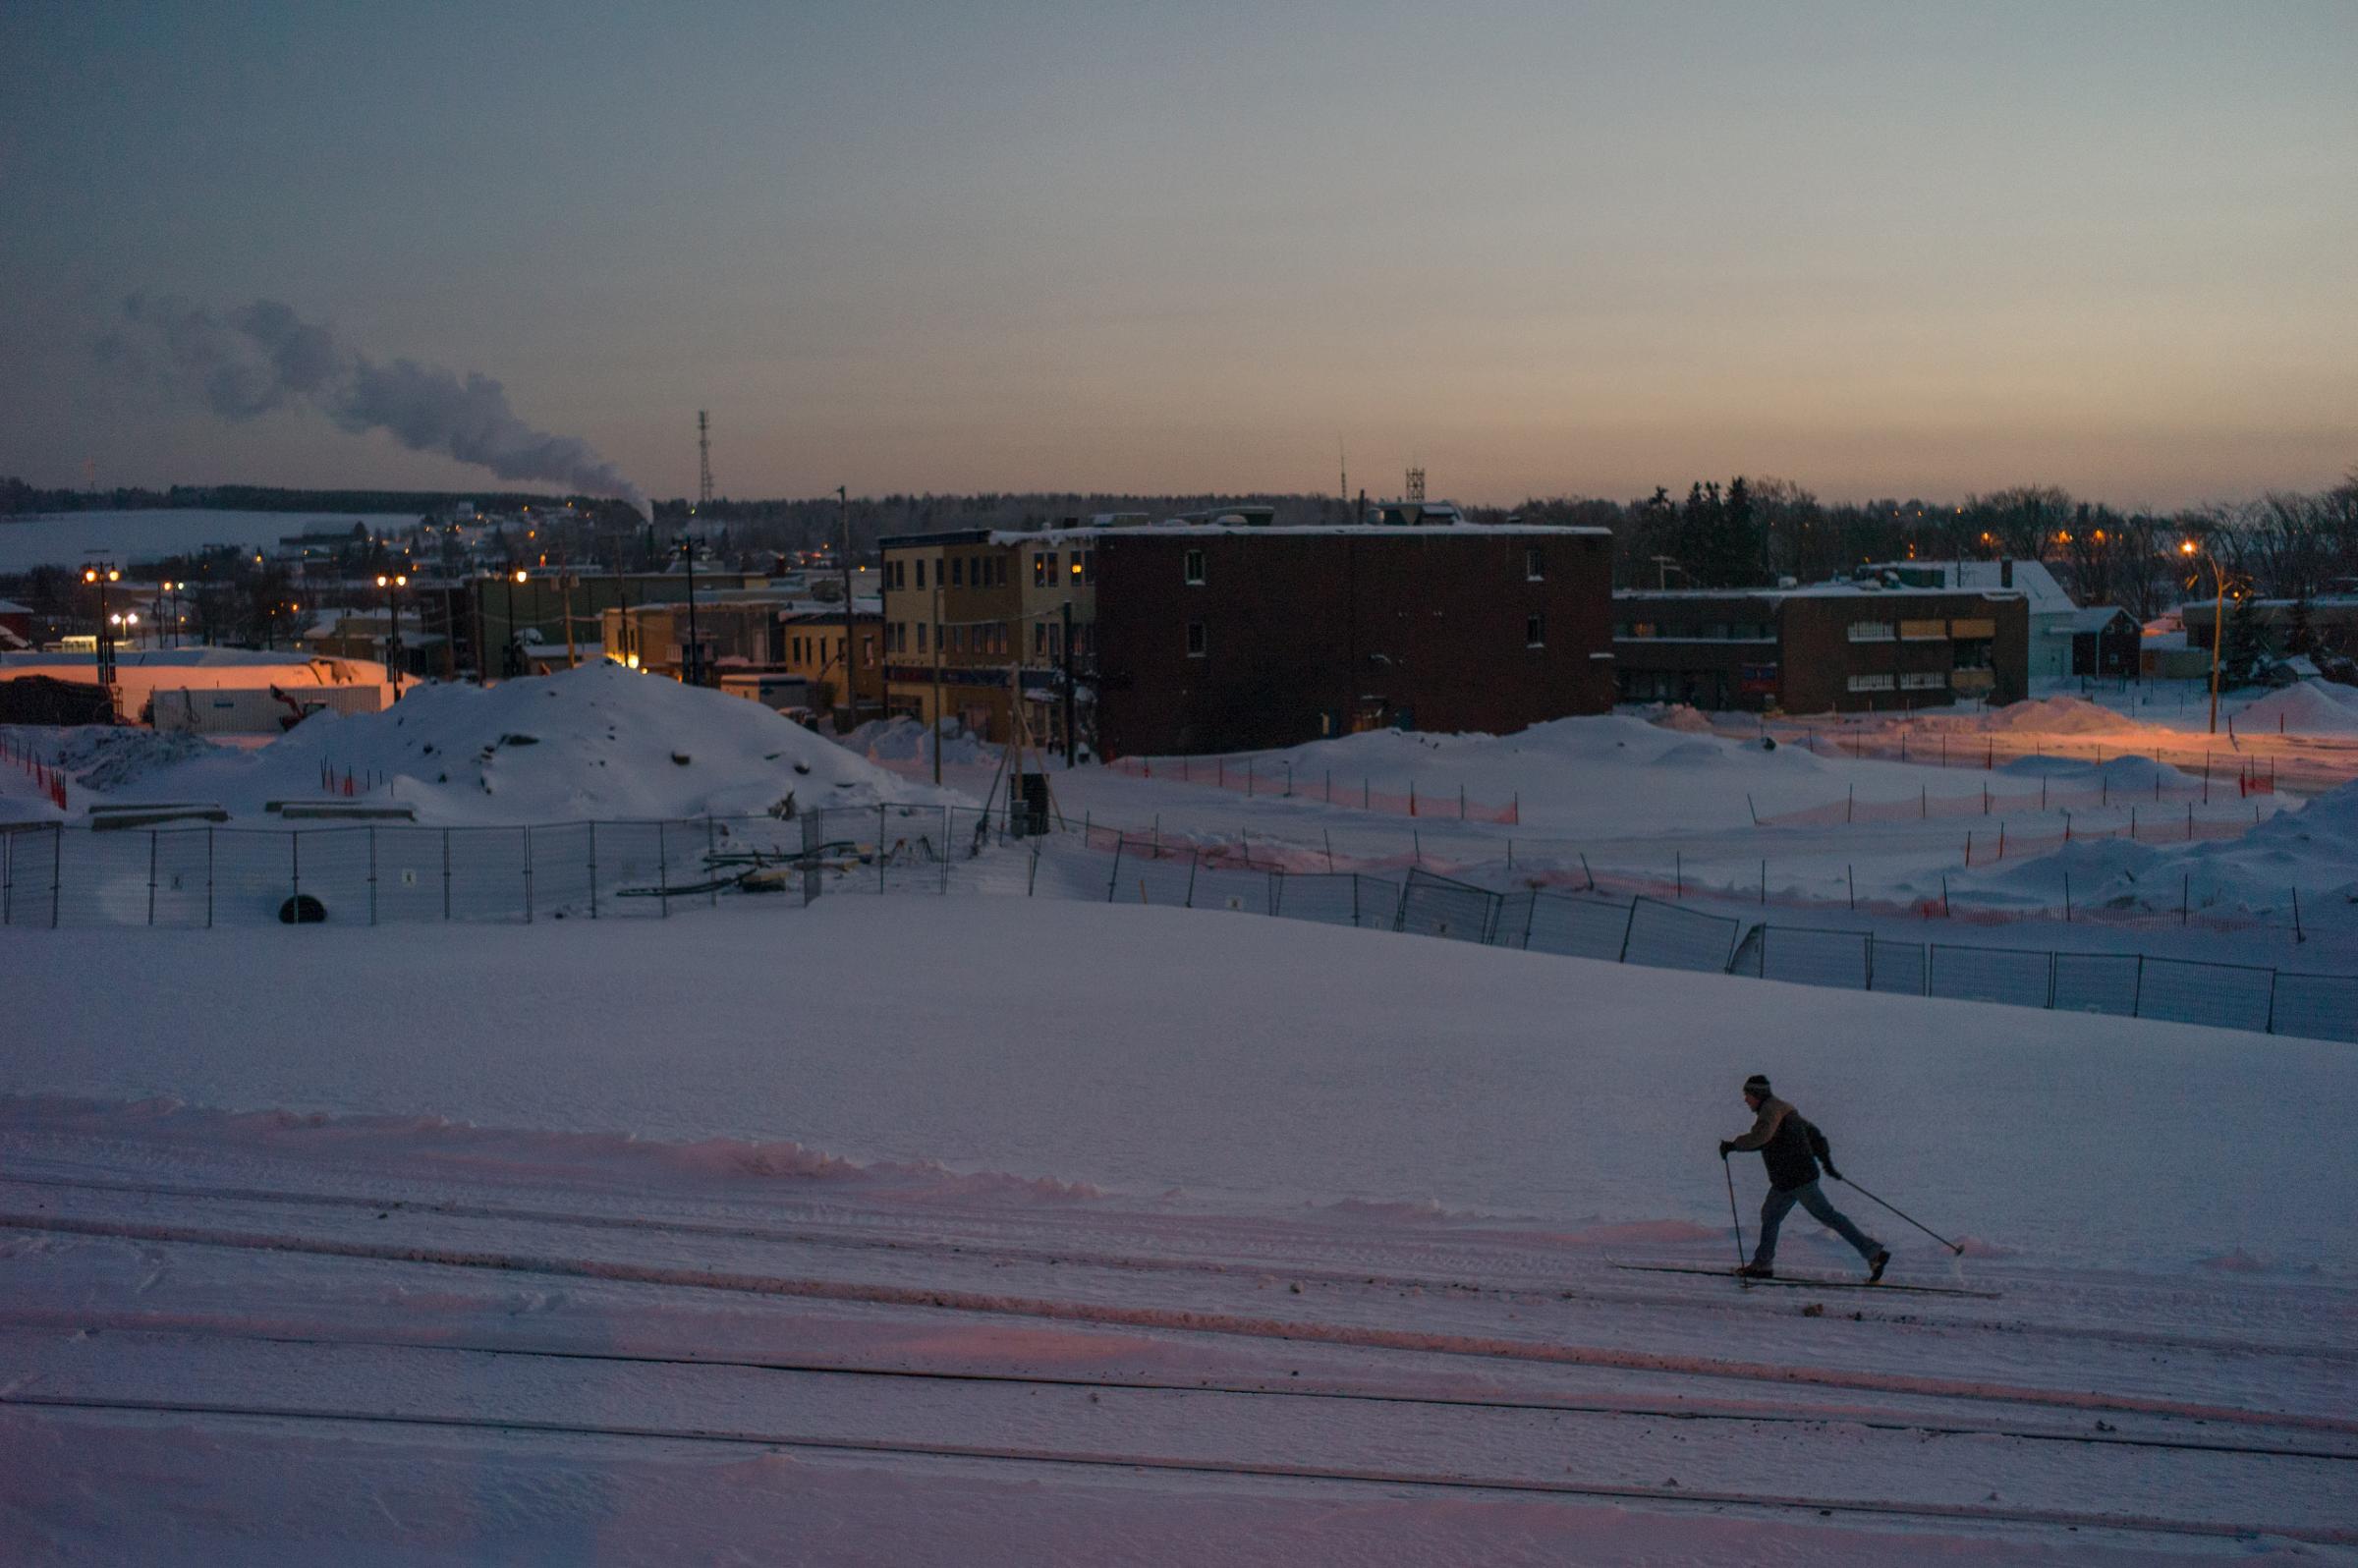 A cross-country skier on the rehabilitated train tracks next to the still-closed Red Zone, December 31 2013. From "Post MÈgantic" by Michel Huneault, winner of the 2015 Lange-Taylor Prize.